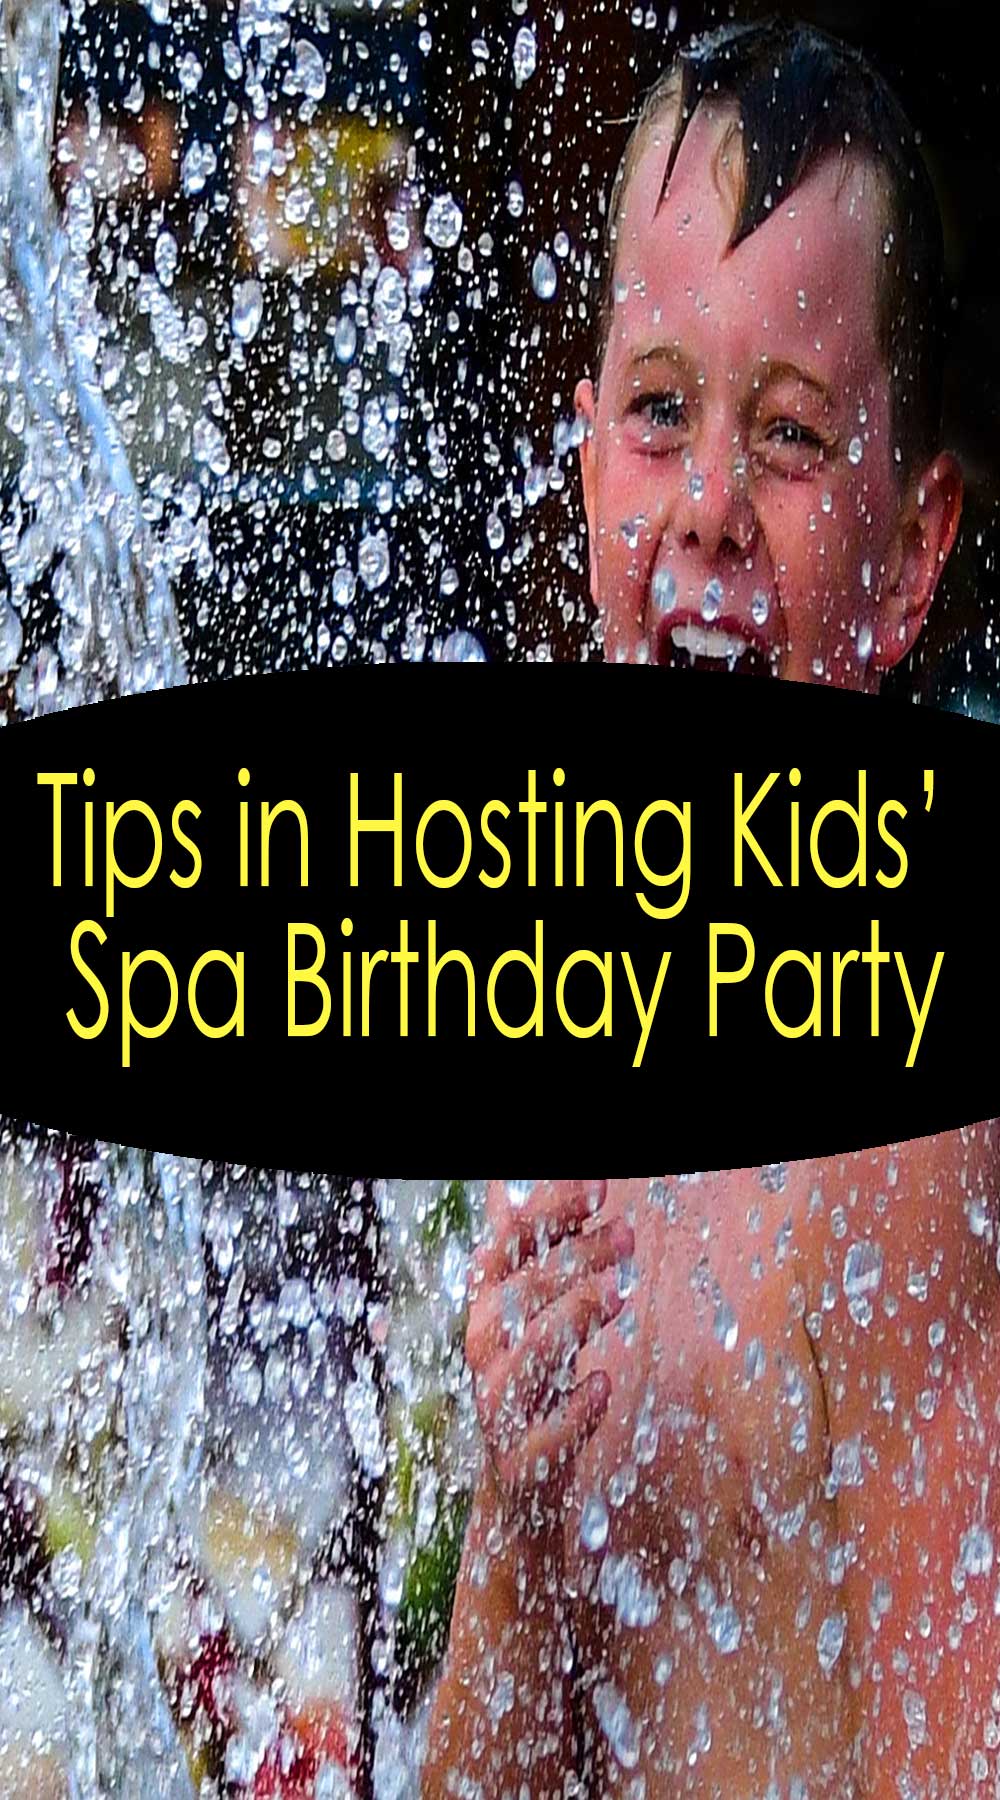 Tips in Hosting Spa Birthday Party